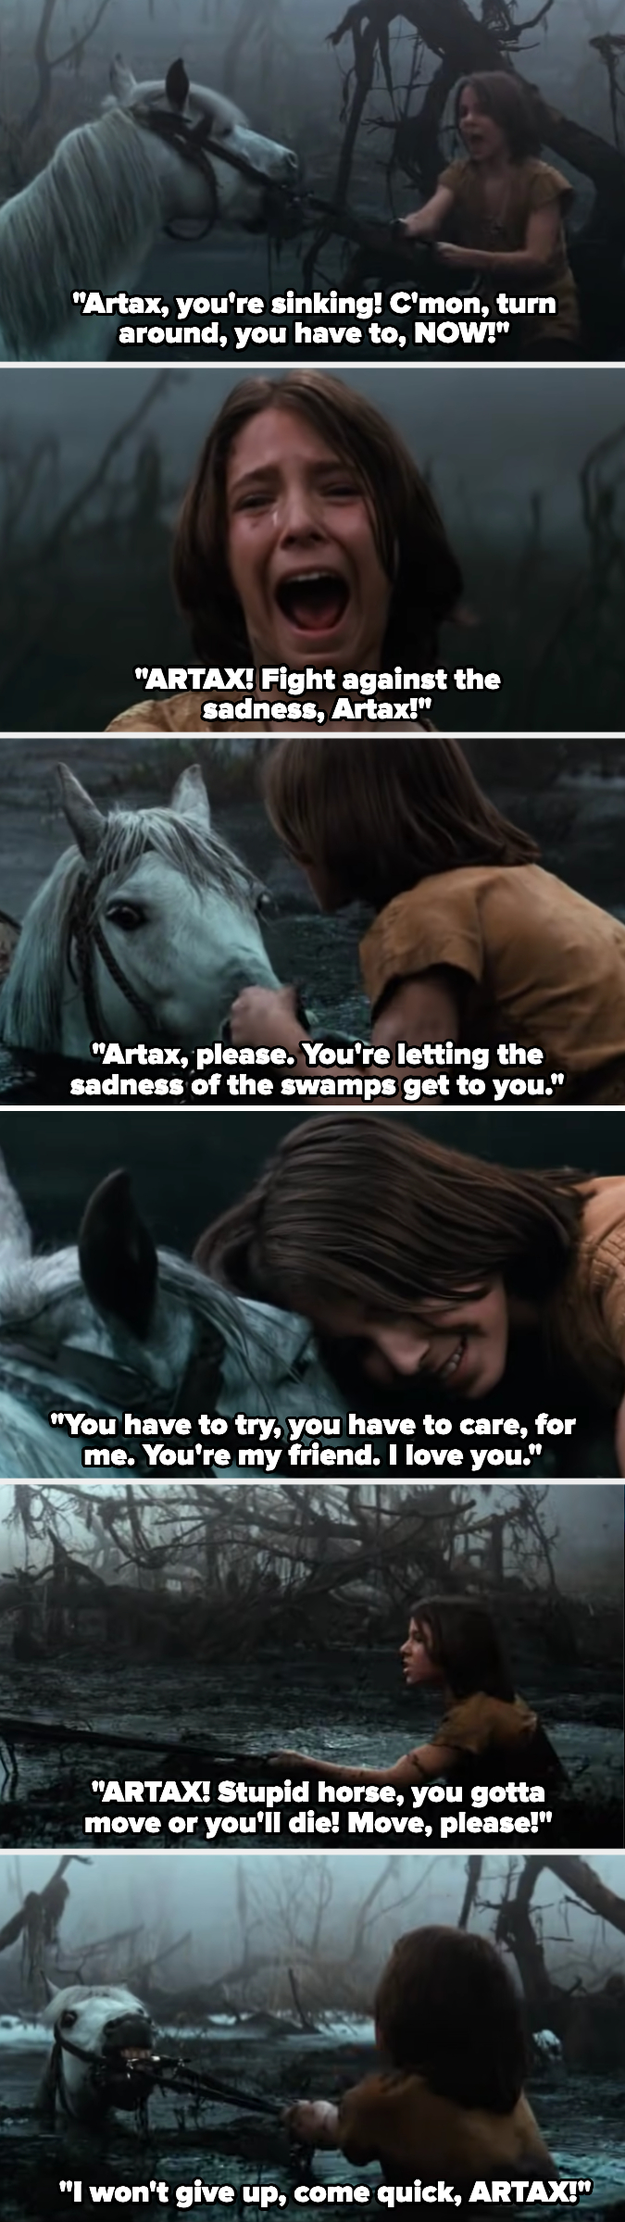 kid telling the horse, Artax, you have to you&#x27;re sinking you have to try, move or you&#x27;ll die, as the kid tries pulling the horse out of the swamp